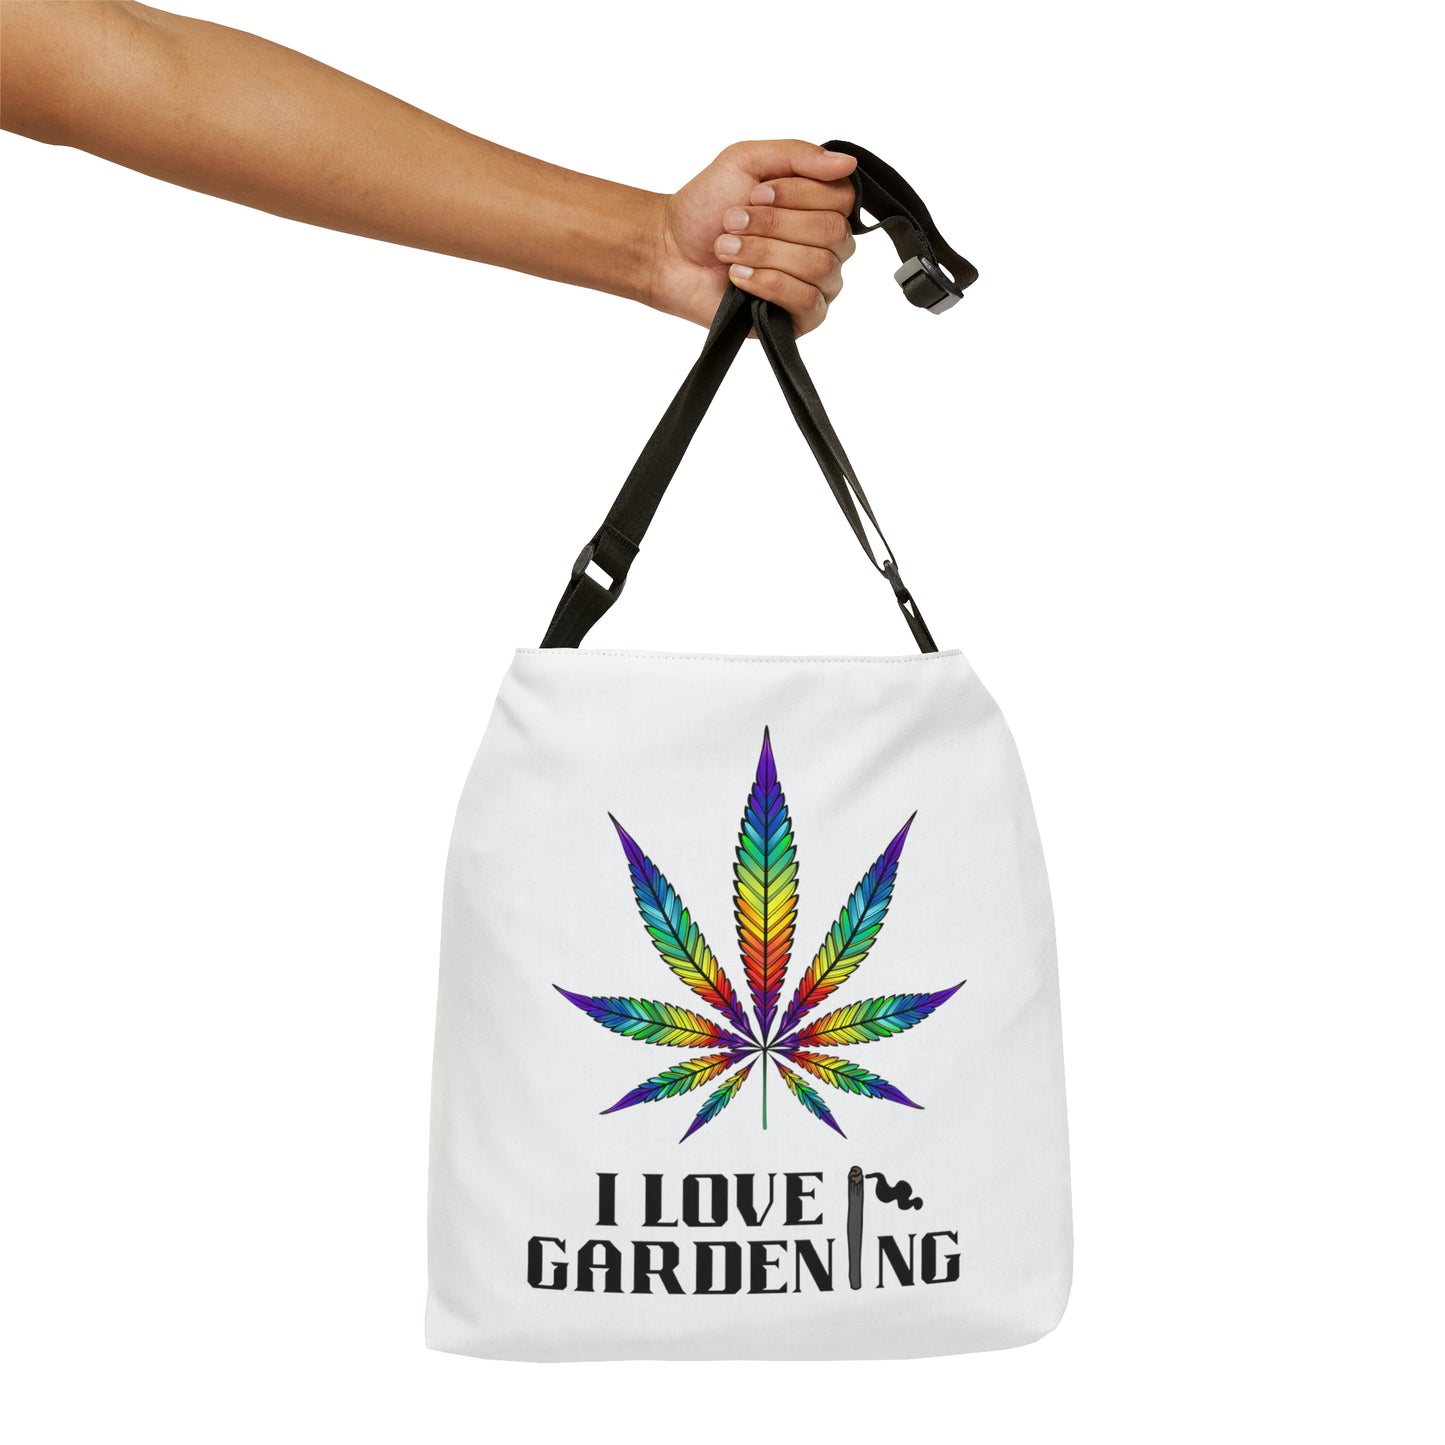 White Colorful Cannabis Chic Tote: For the Stylish Green Thumb